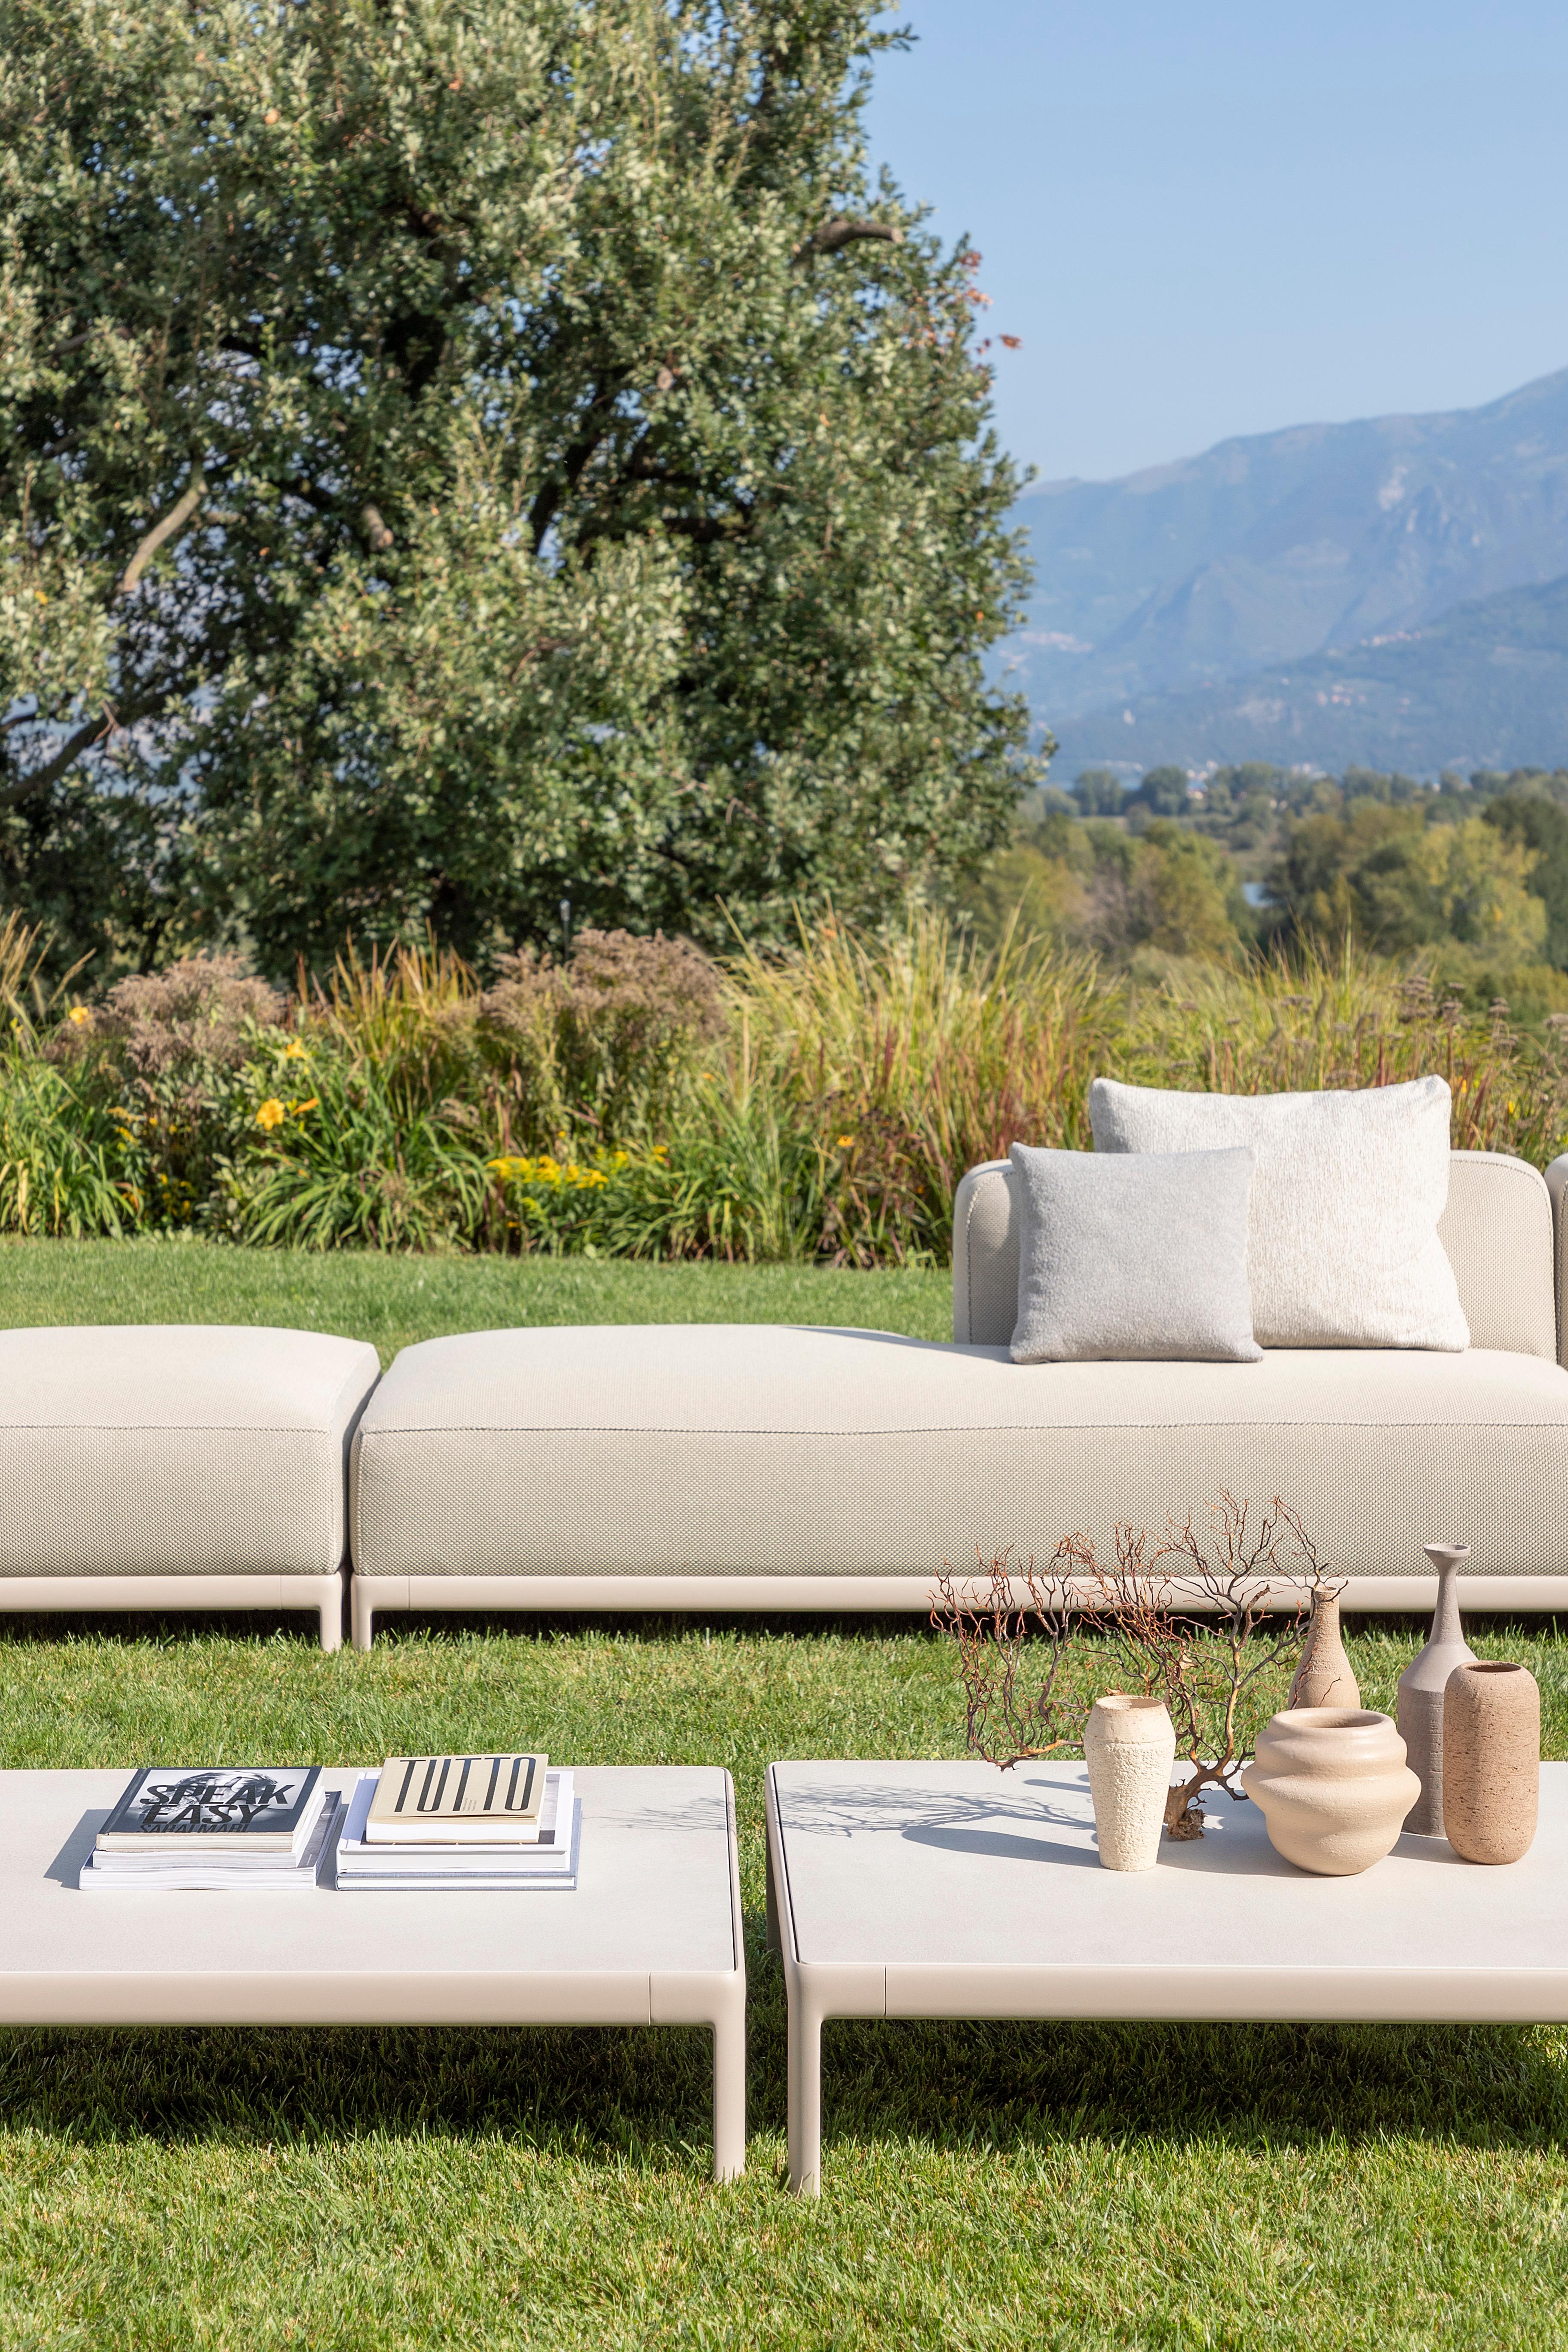 Alias P64+P70 AluZen Soft Sofa Set in Upholstery with Lacquered Aluminium Frame by Ludovica & Roberto Palomba

MODULAR CORNER ELEMENT 190x95 cm.
Modular corner element for outdoor use with structure in lacquered aluminium.Seat, back and armrest